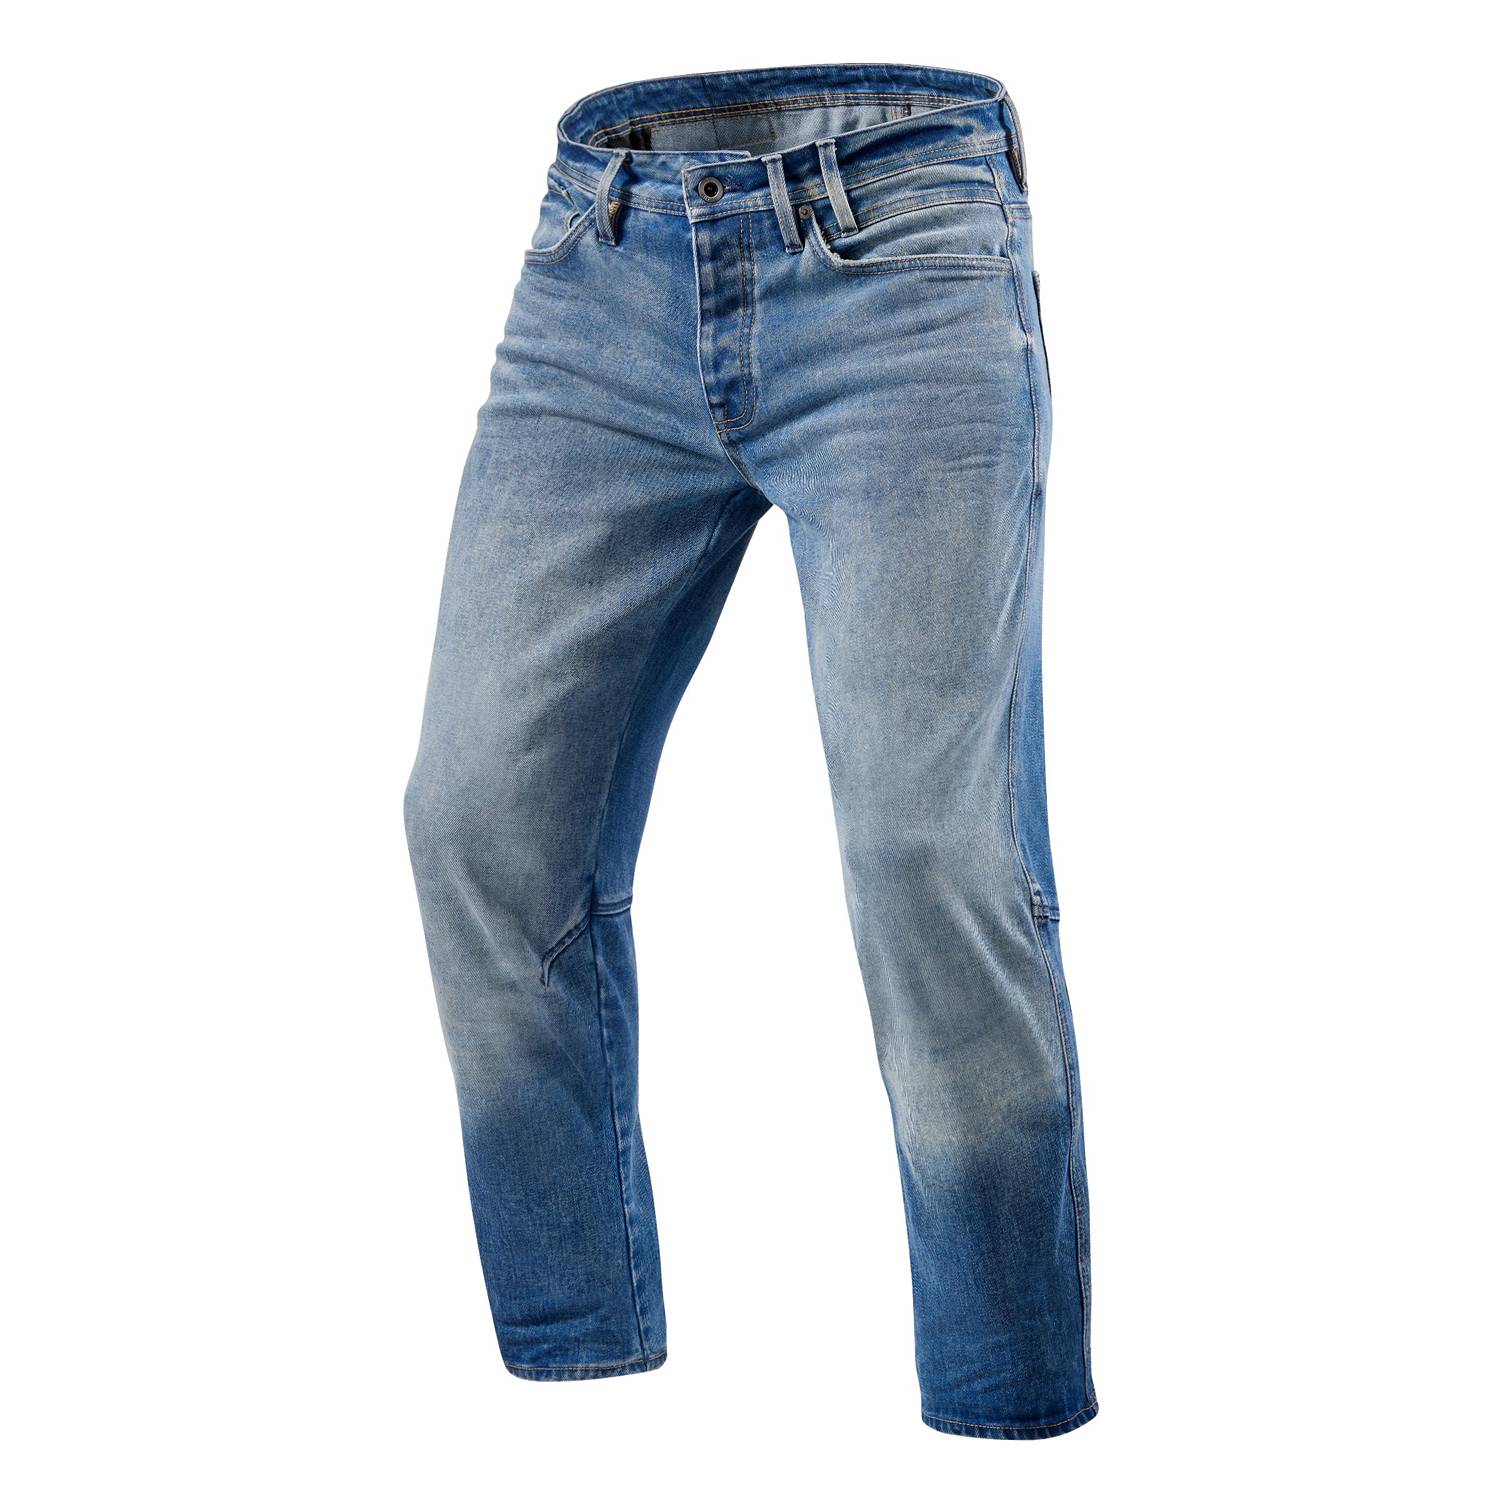 Image of EU REV'IT! Salt TF Mid Blue Used Motorcycle Jeans Taille L34/W36